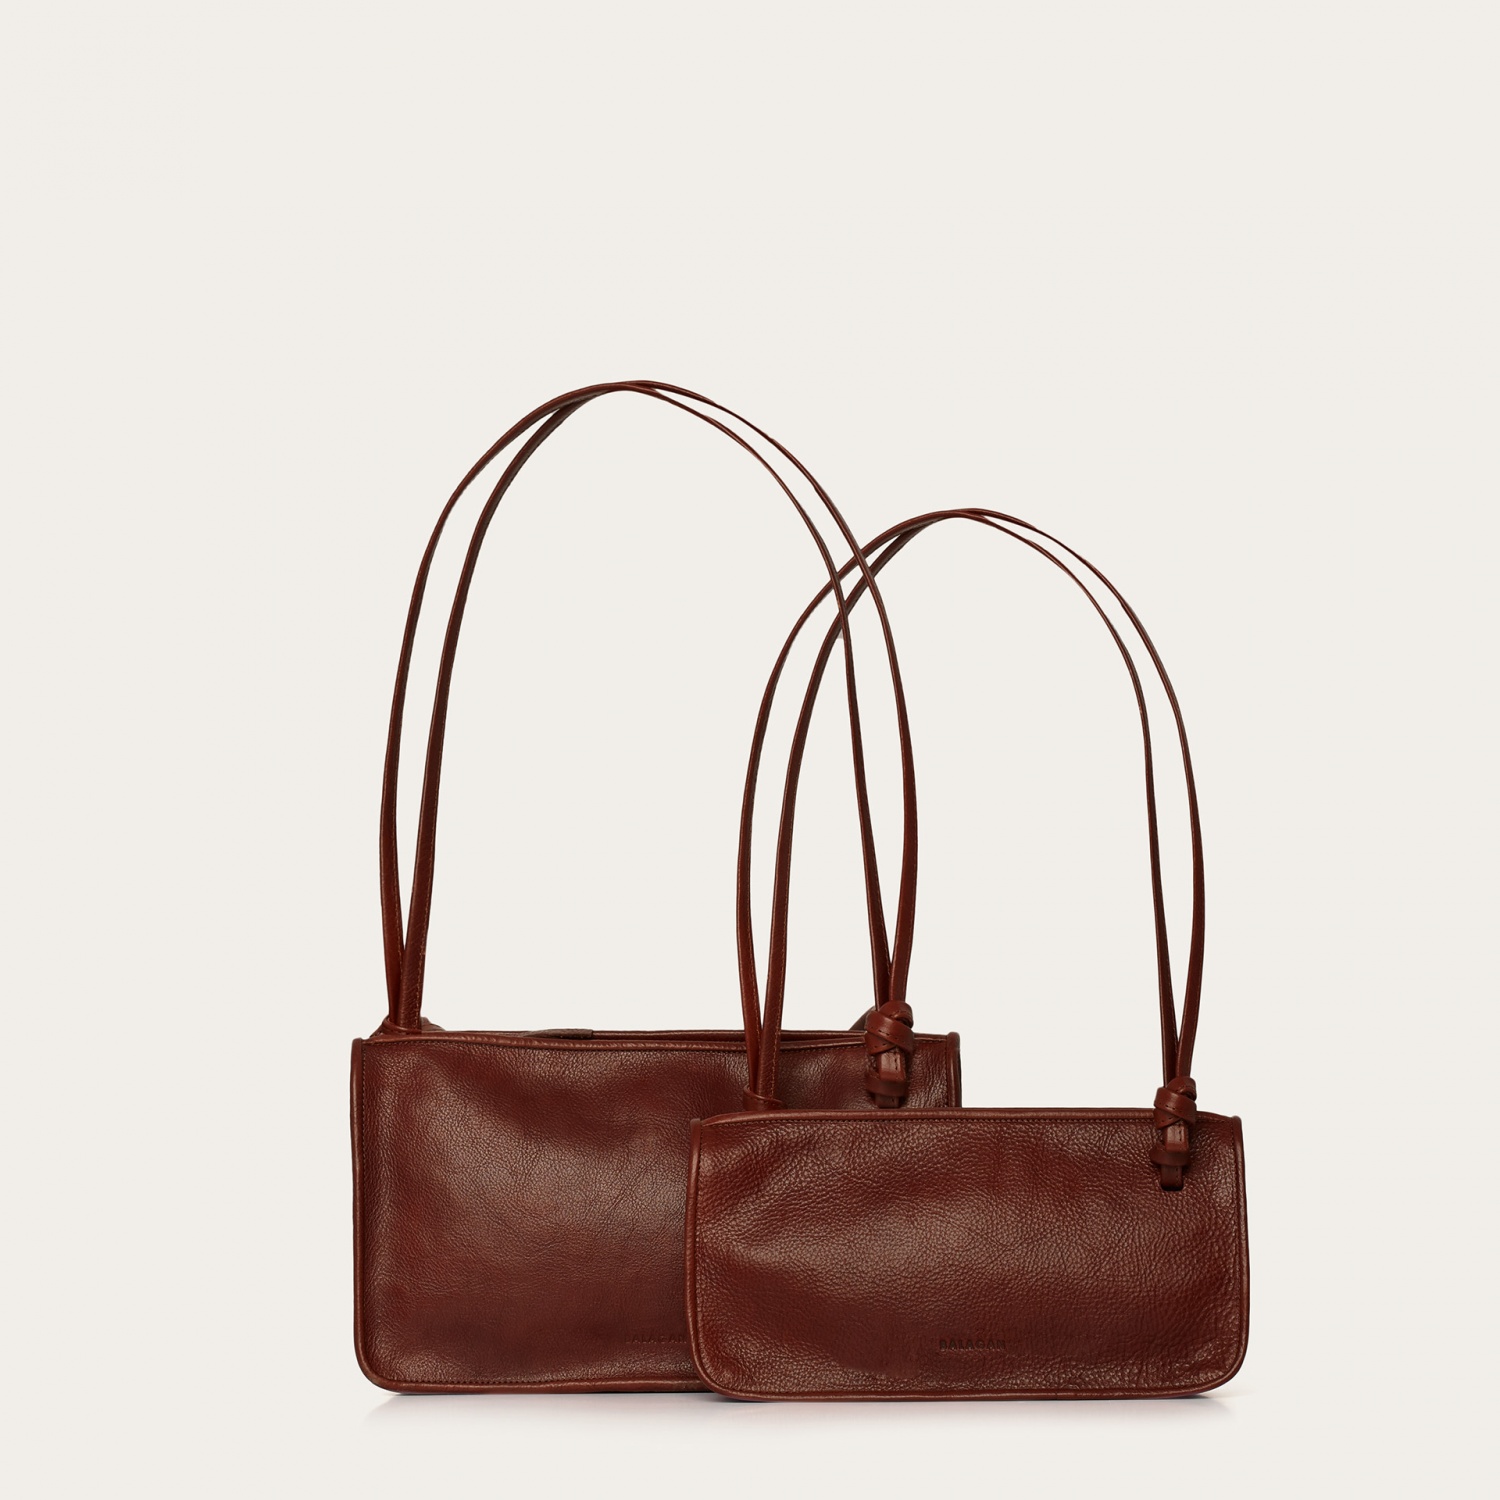  Suzanne Bag S, brown-4 